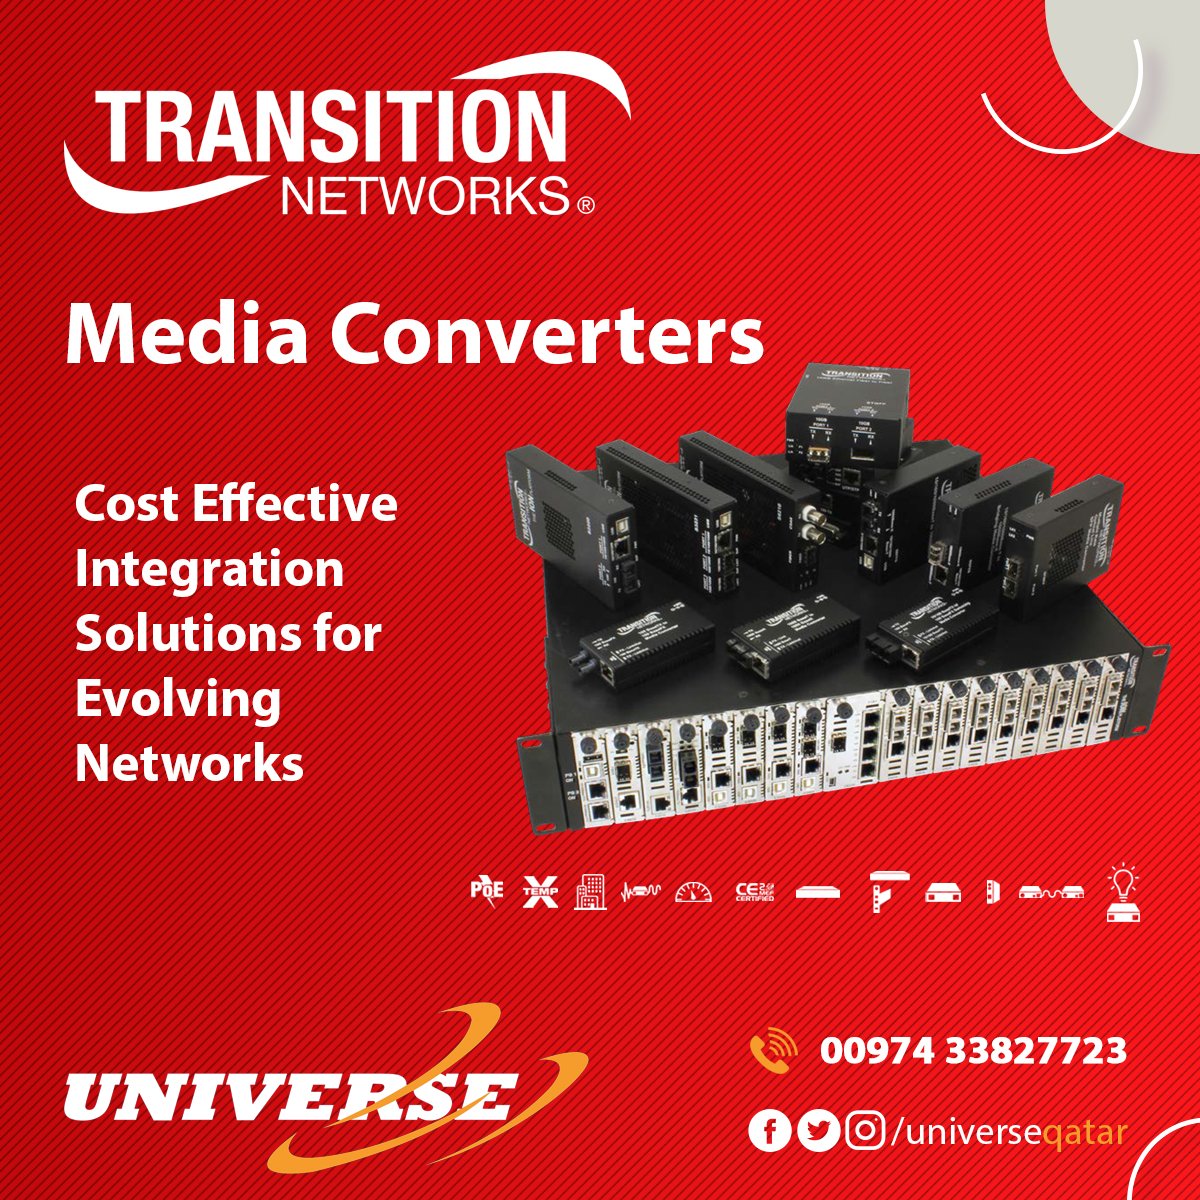 Transition Networks Media Converters
@TNConnection #mediaconverters #transitionnetworks #qatarprojects #universe #qatar2022 #CostEffective #Networksmedia